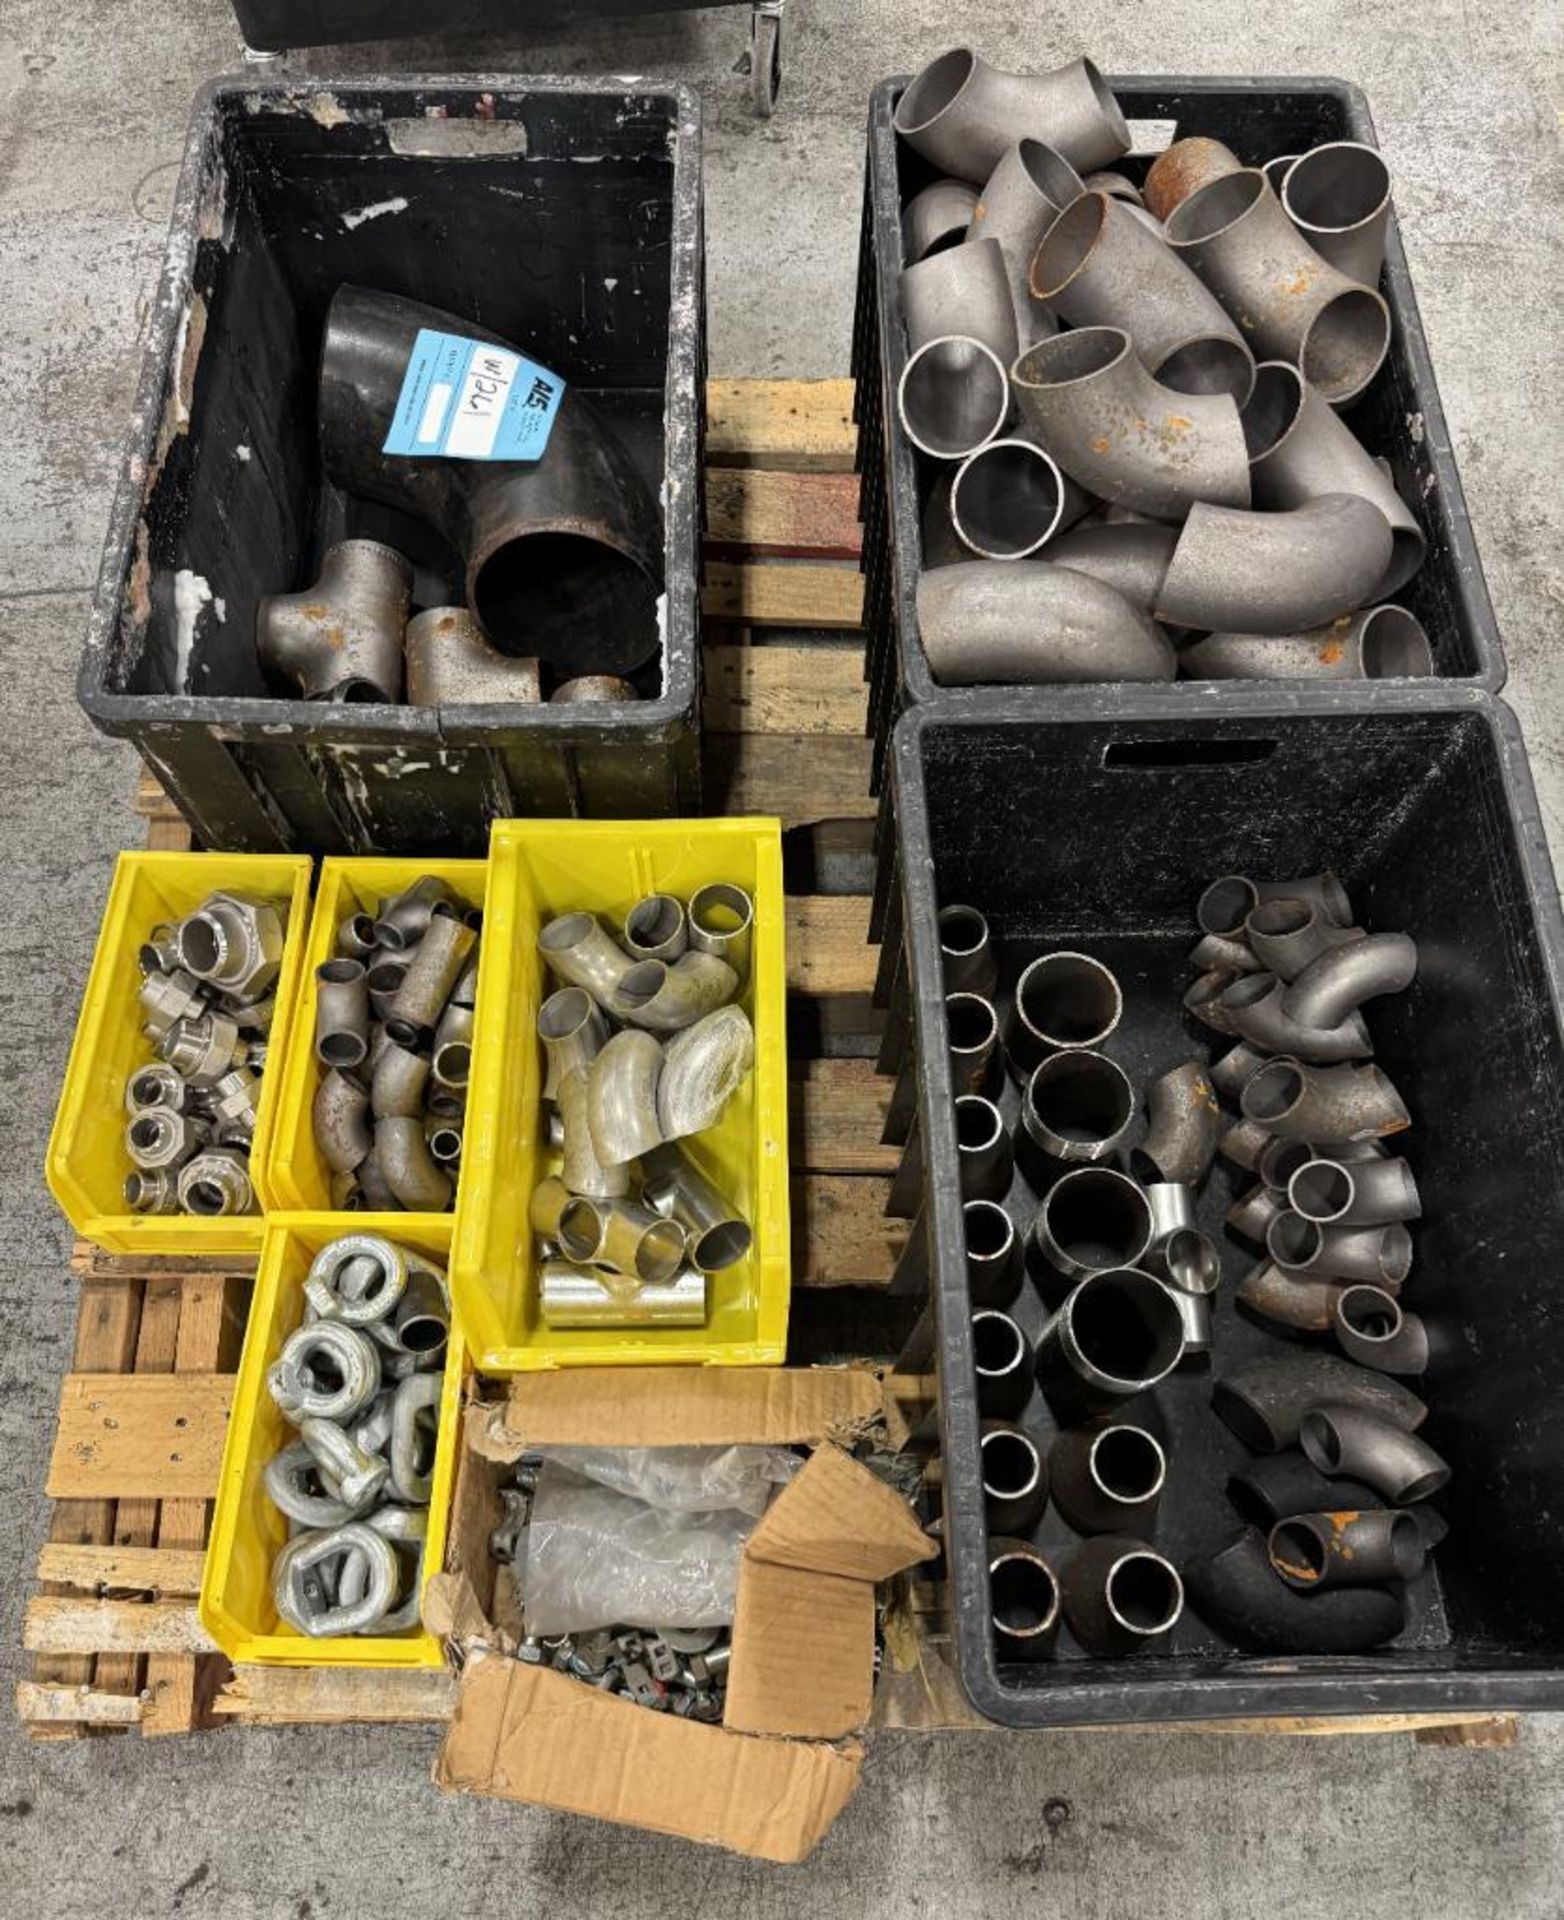 Lot Consisting Of: Spool of wire, pipe hangers, pipe fittings, hose, butterfly valves. - Image 8 of 15